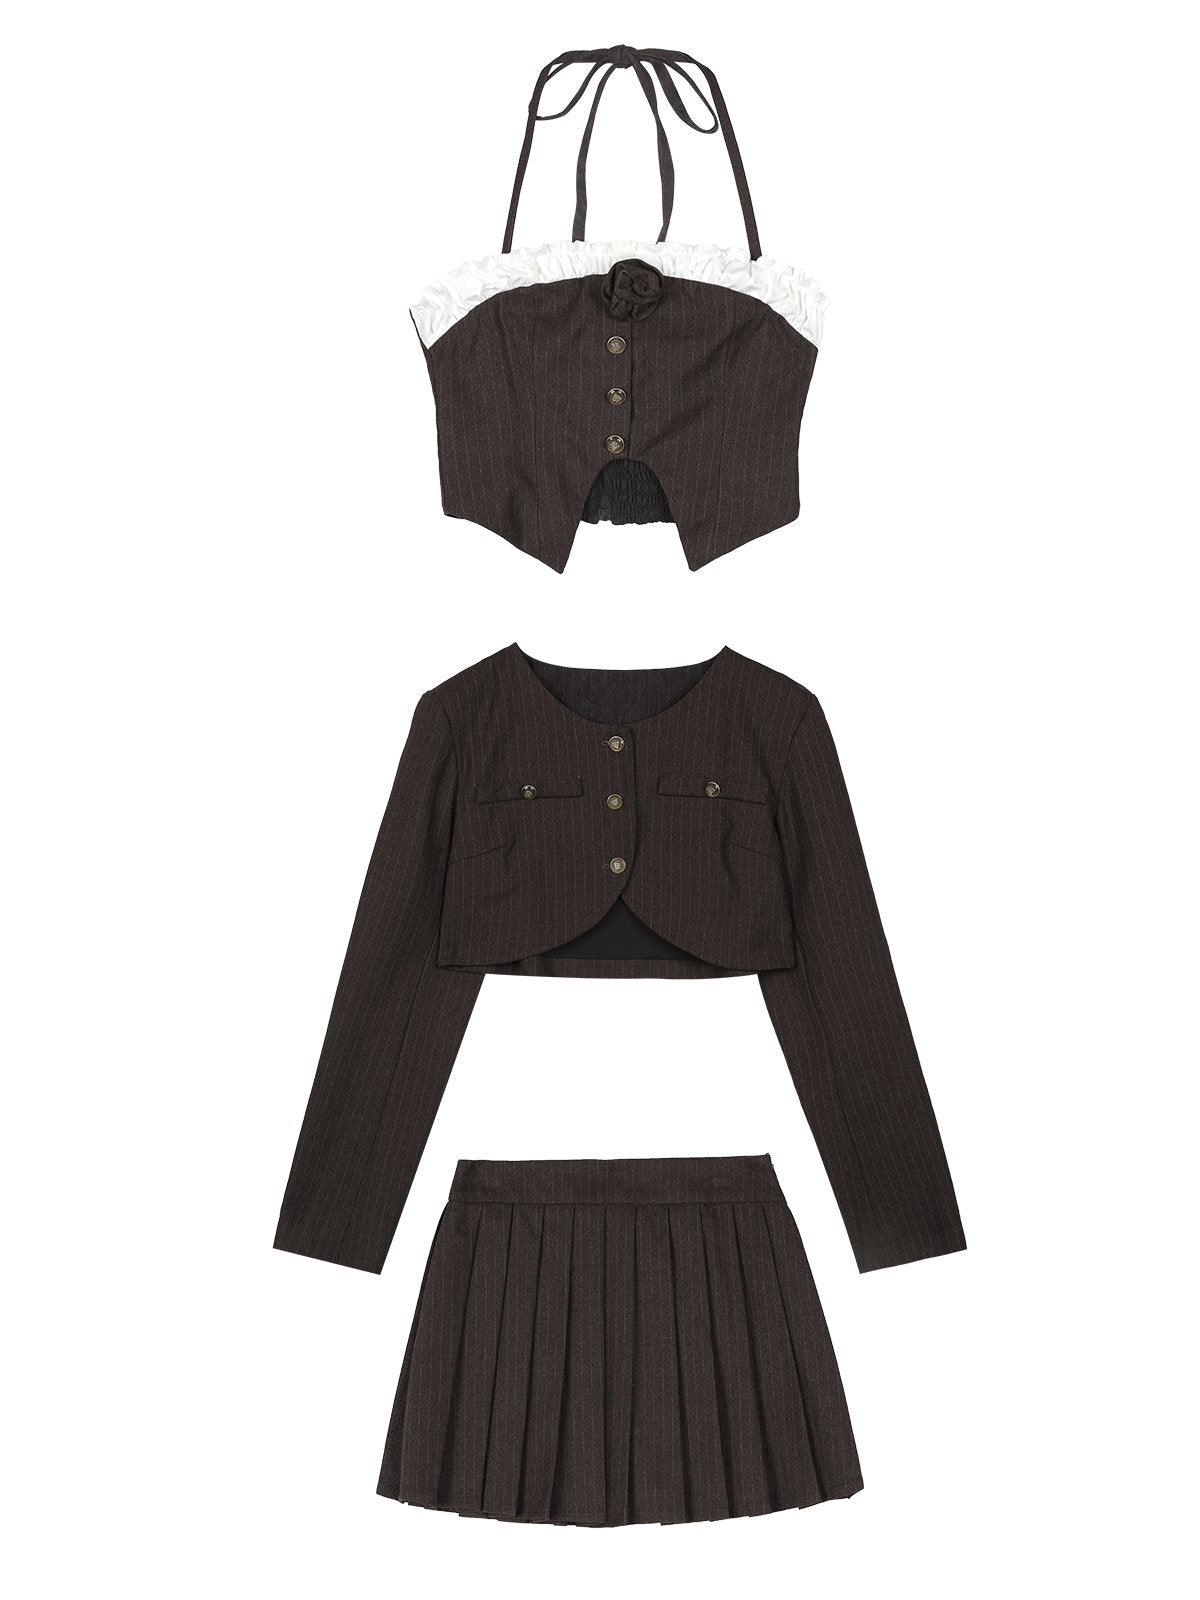 Cropped Collarless Jacket,  Halter-Neck Camisole and Pleated Mini Skirt  SHI0016